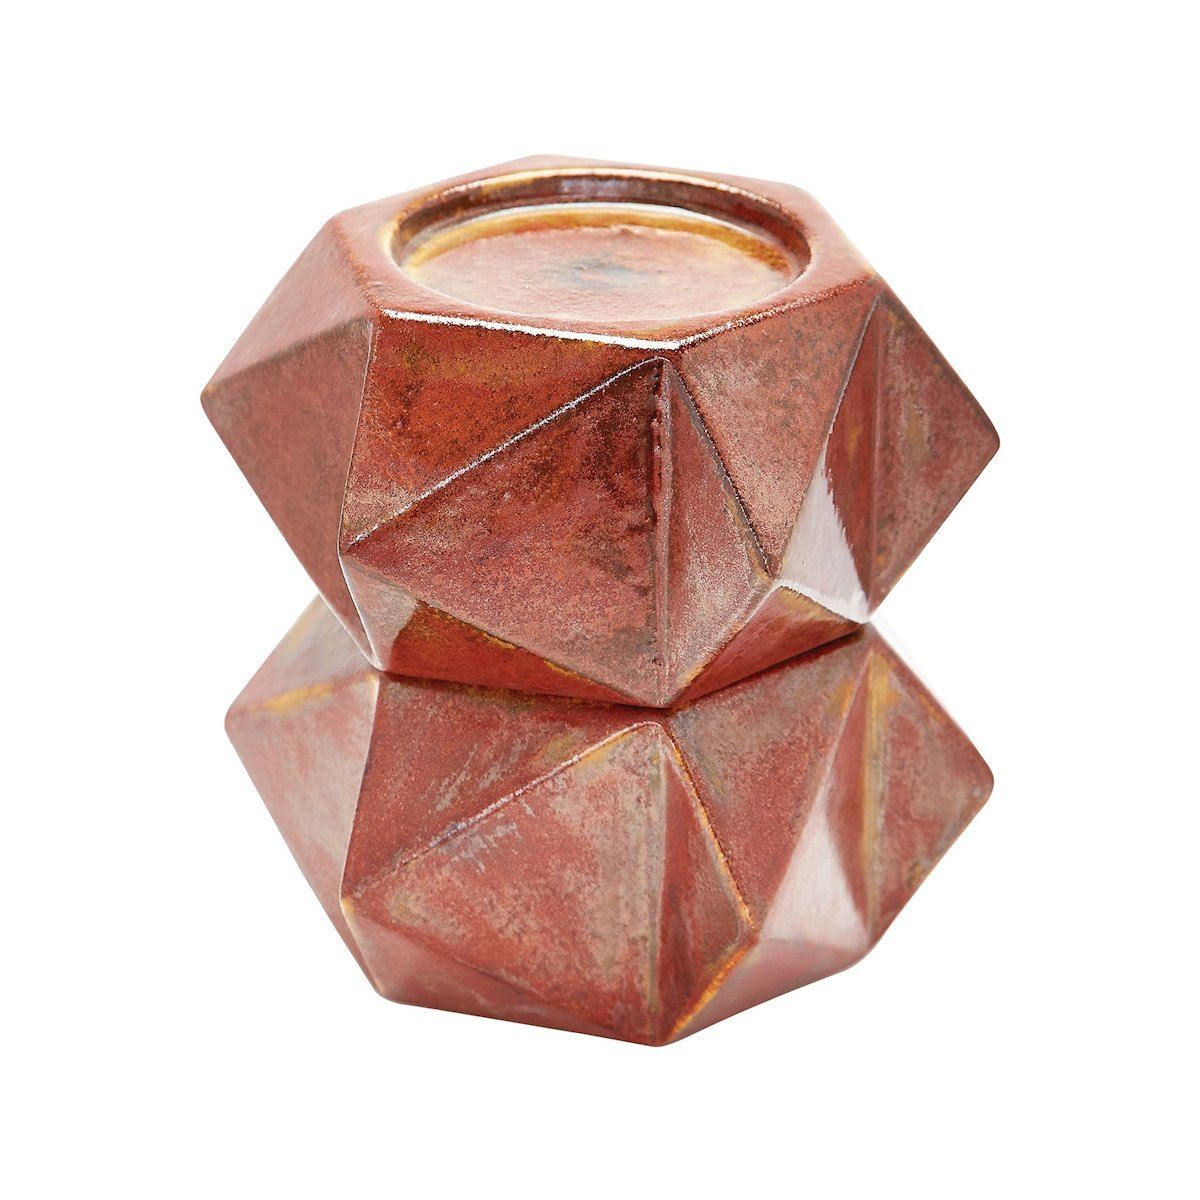 Large Ceramic Star Candle Holders In Russet - Set of 2 Accessories Dimond Home 